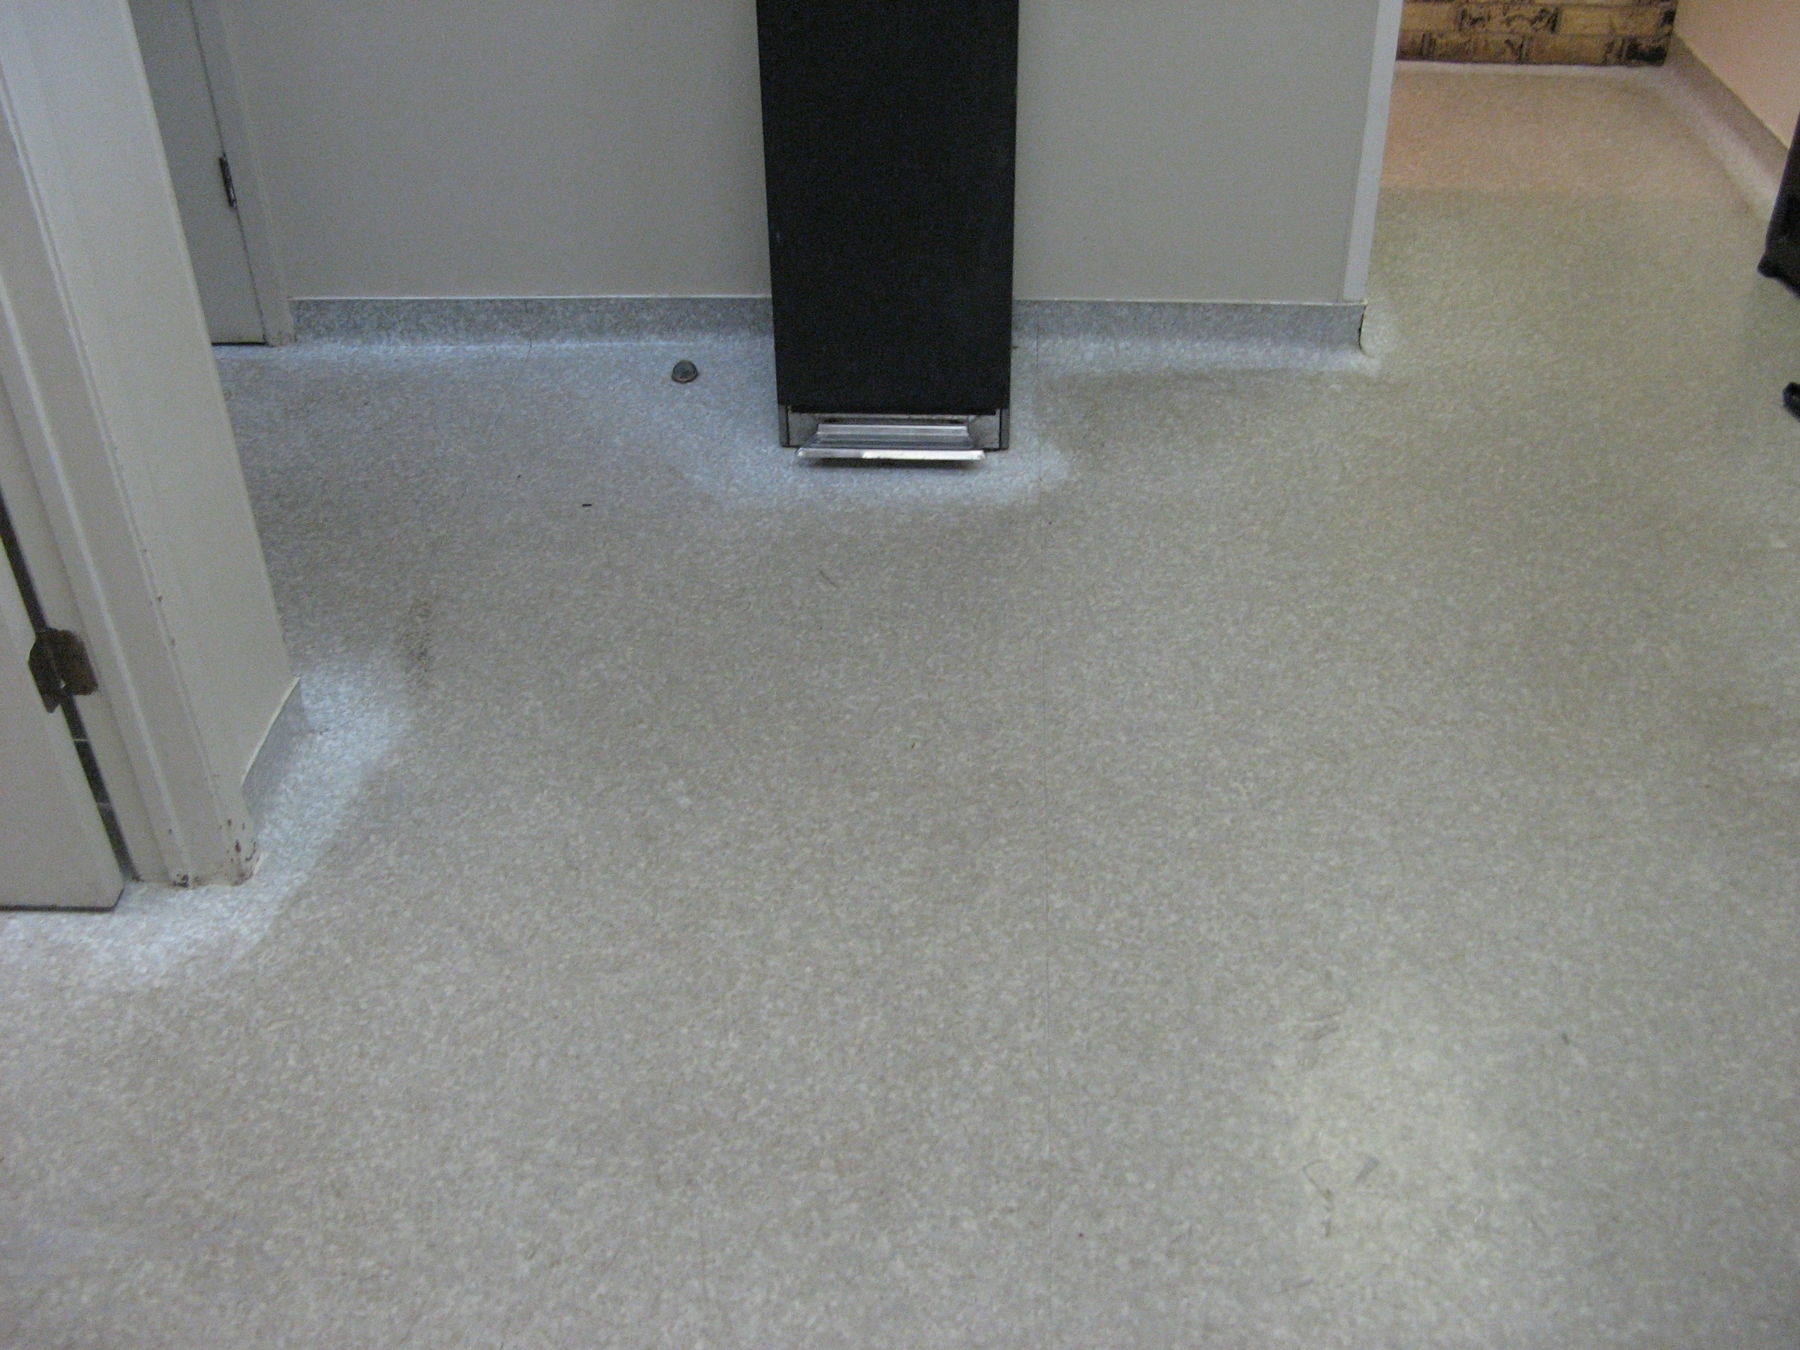 How to Clean Commercial Tile, VCT and Carpet